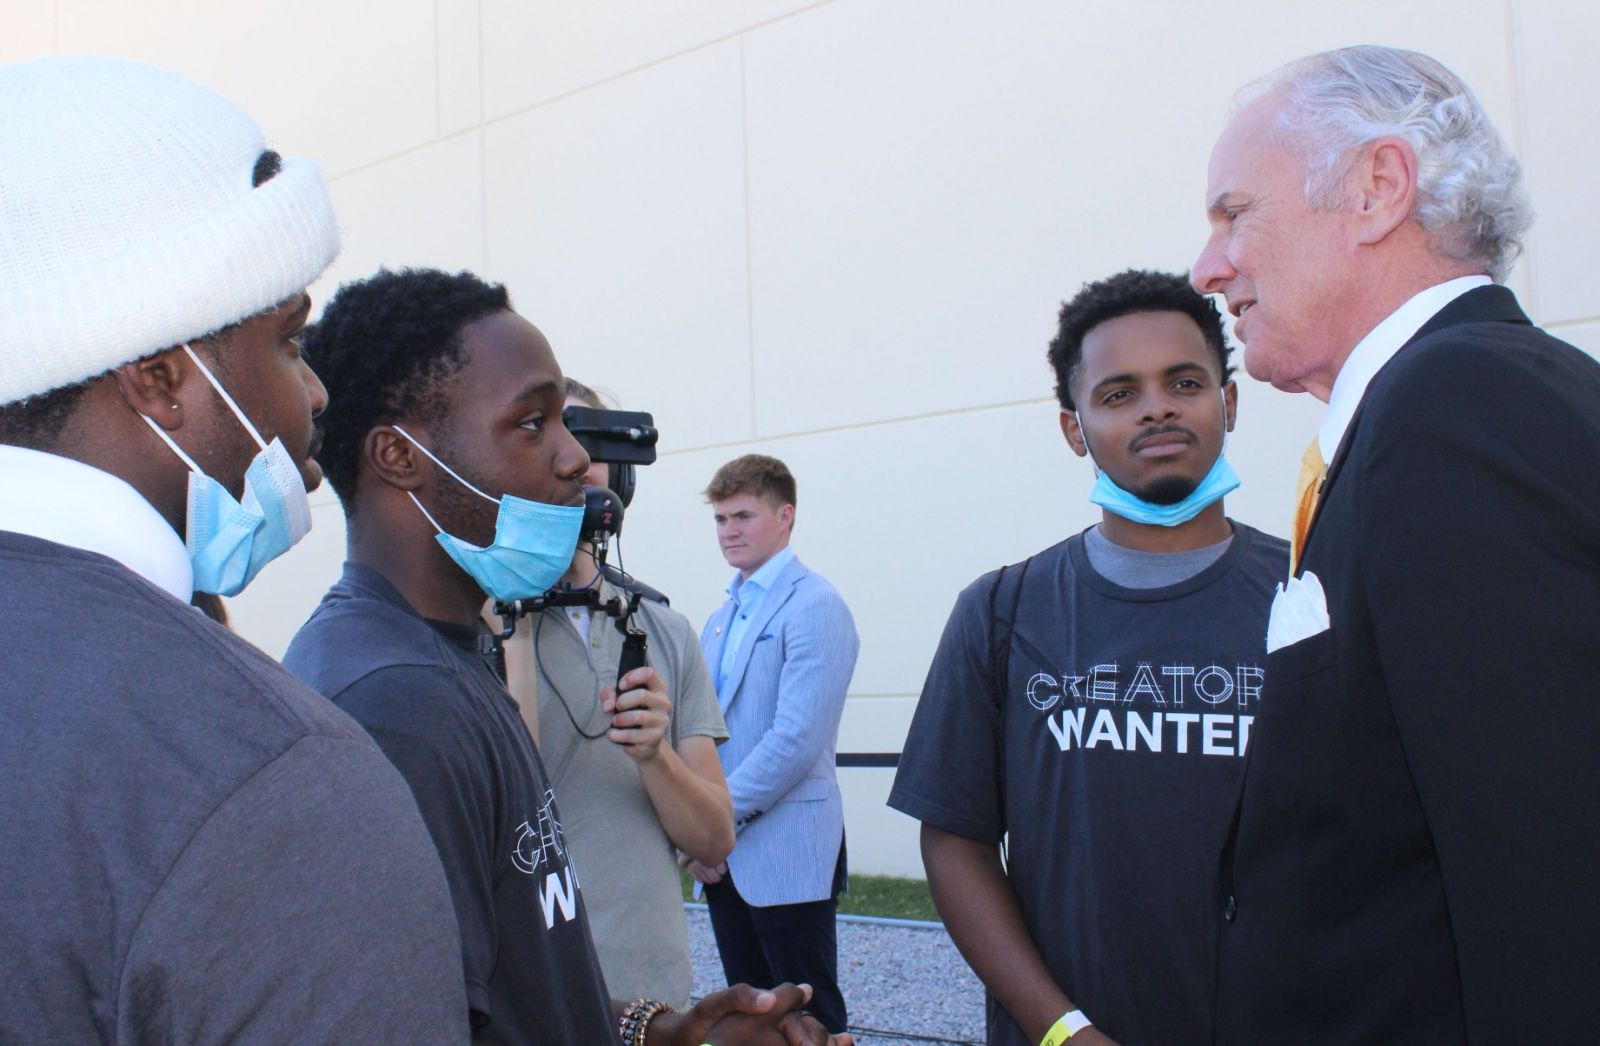 S.C. Gov. Henry McMaster talks with a group of young people interested in potential manufacturing careers at the Creators Wanted workforce event at Nephron. (Photo/Christina Lee Knauss)